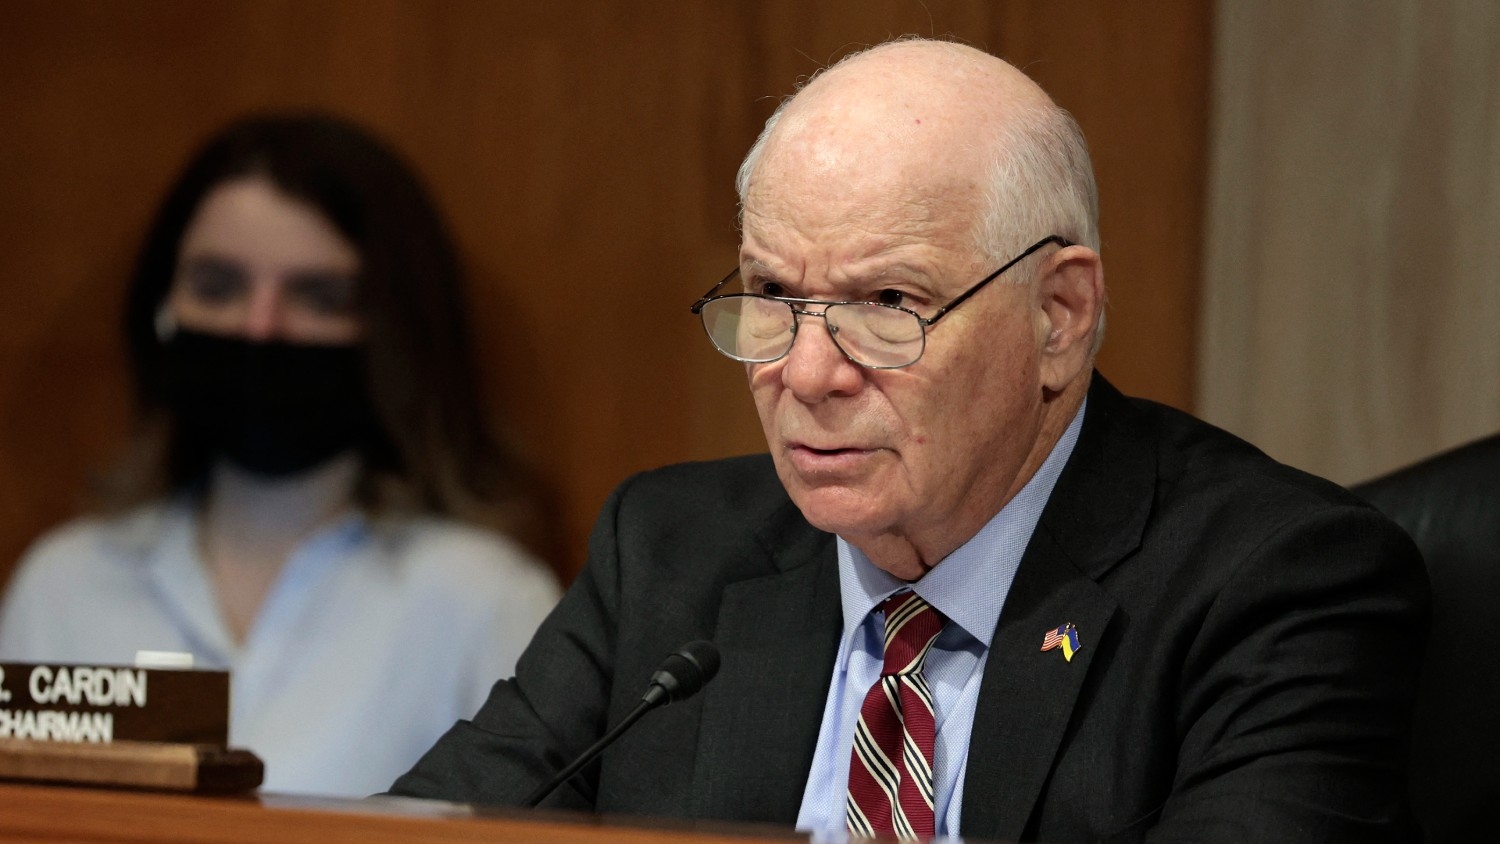 Senator Ben Cardin speaks during a hearing with the Helsinki Commission in the Dirksen Senate Office Building on 23 March 2022 in Washington.